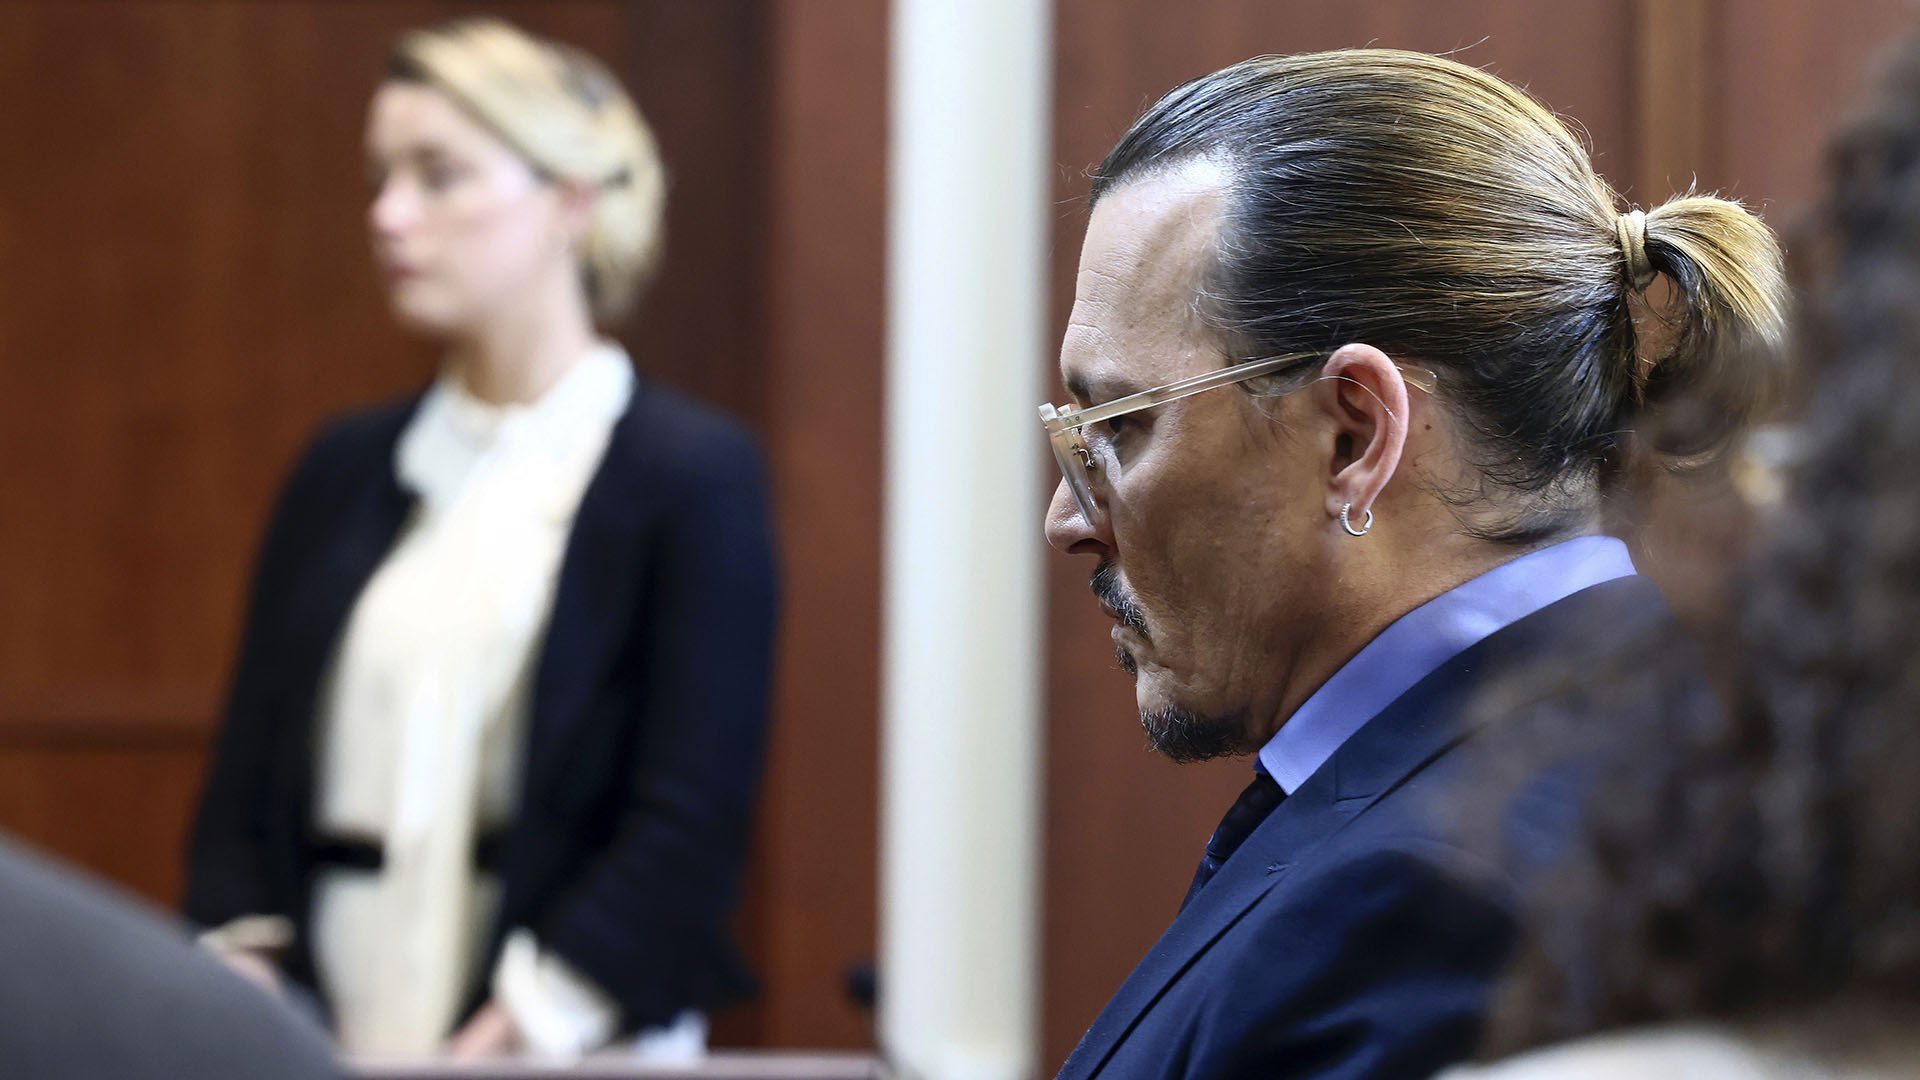 Johnny Depp with Amber Heard in the background in the courtroom.